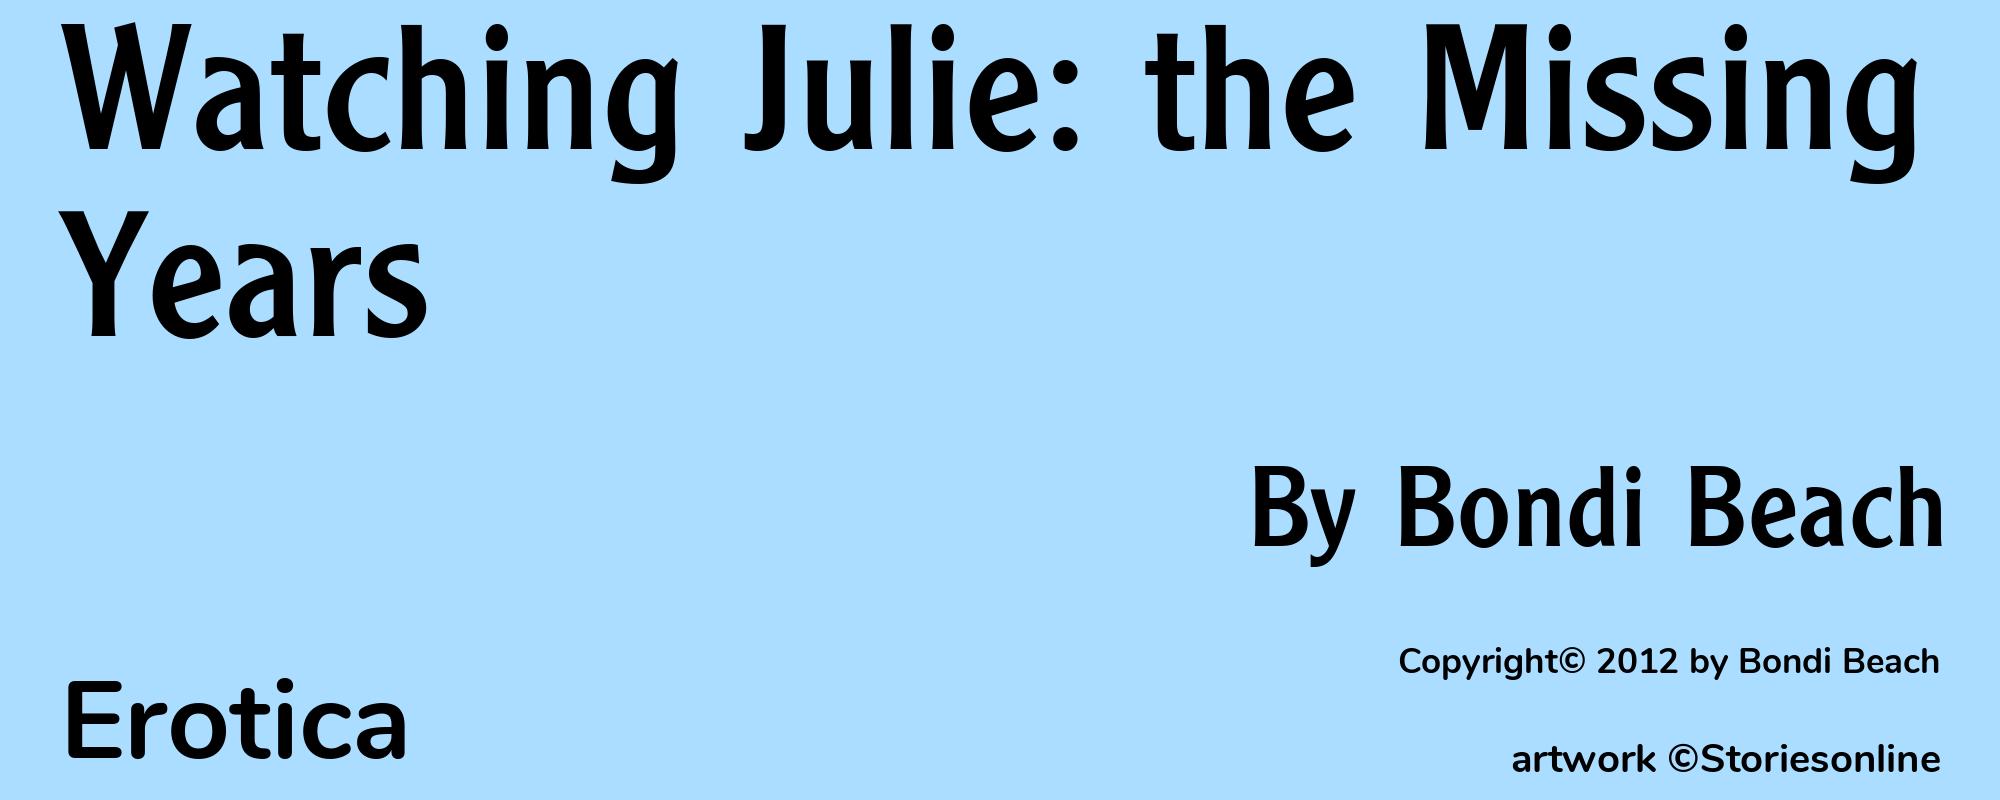 Watching Julie: the Missing Years - Cover